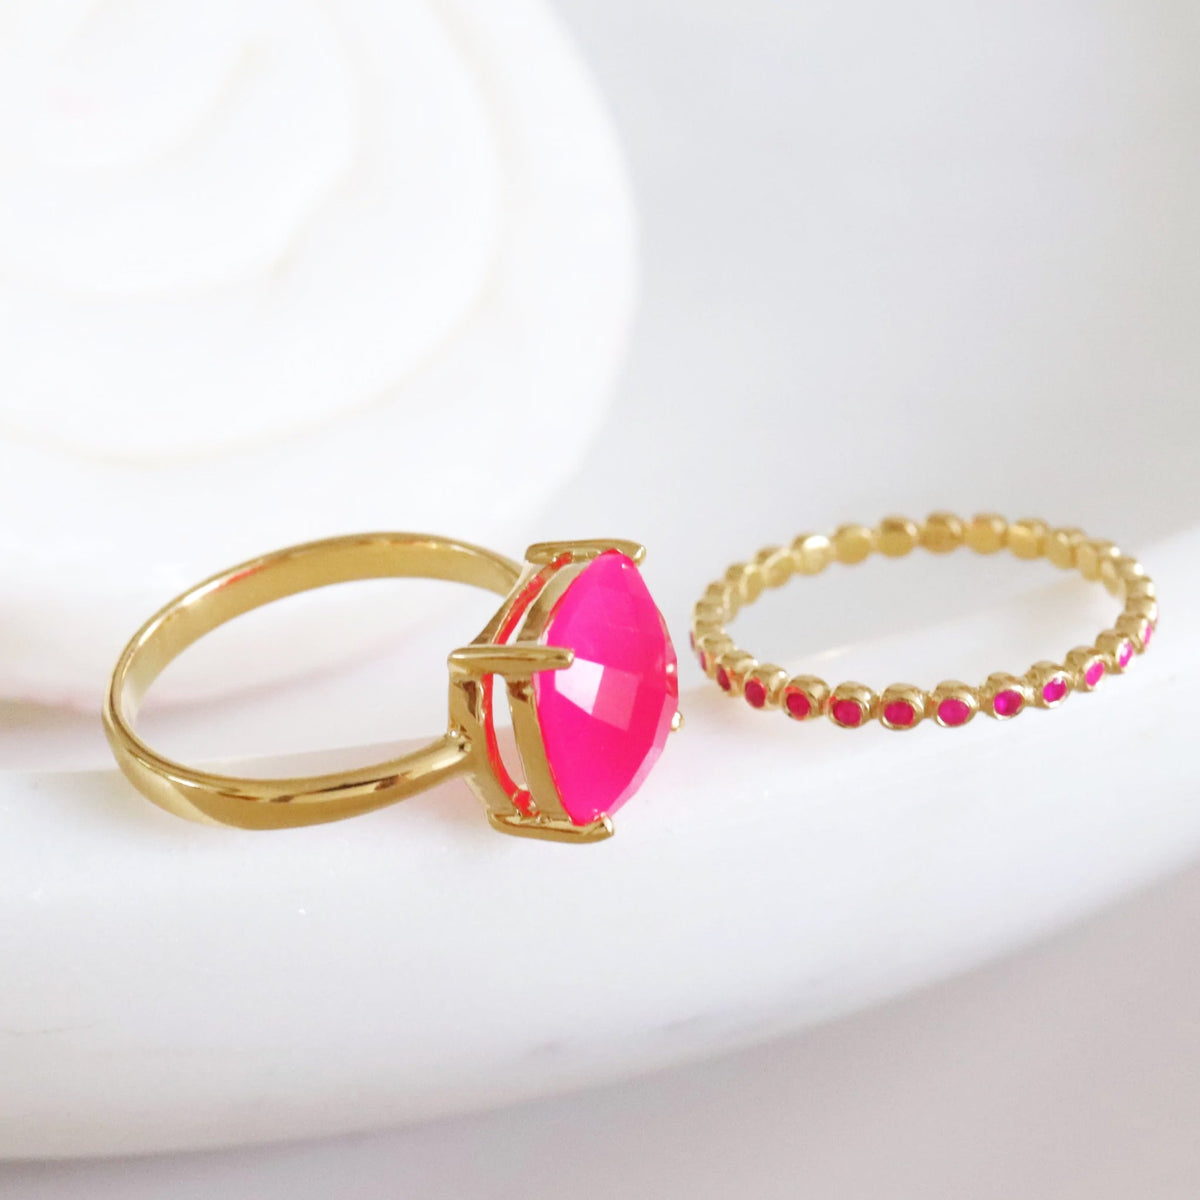 GLEE RING - HOT PINK CHALCEDONY &amp; GOLD - SO PRETTY CARA COTTER